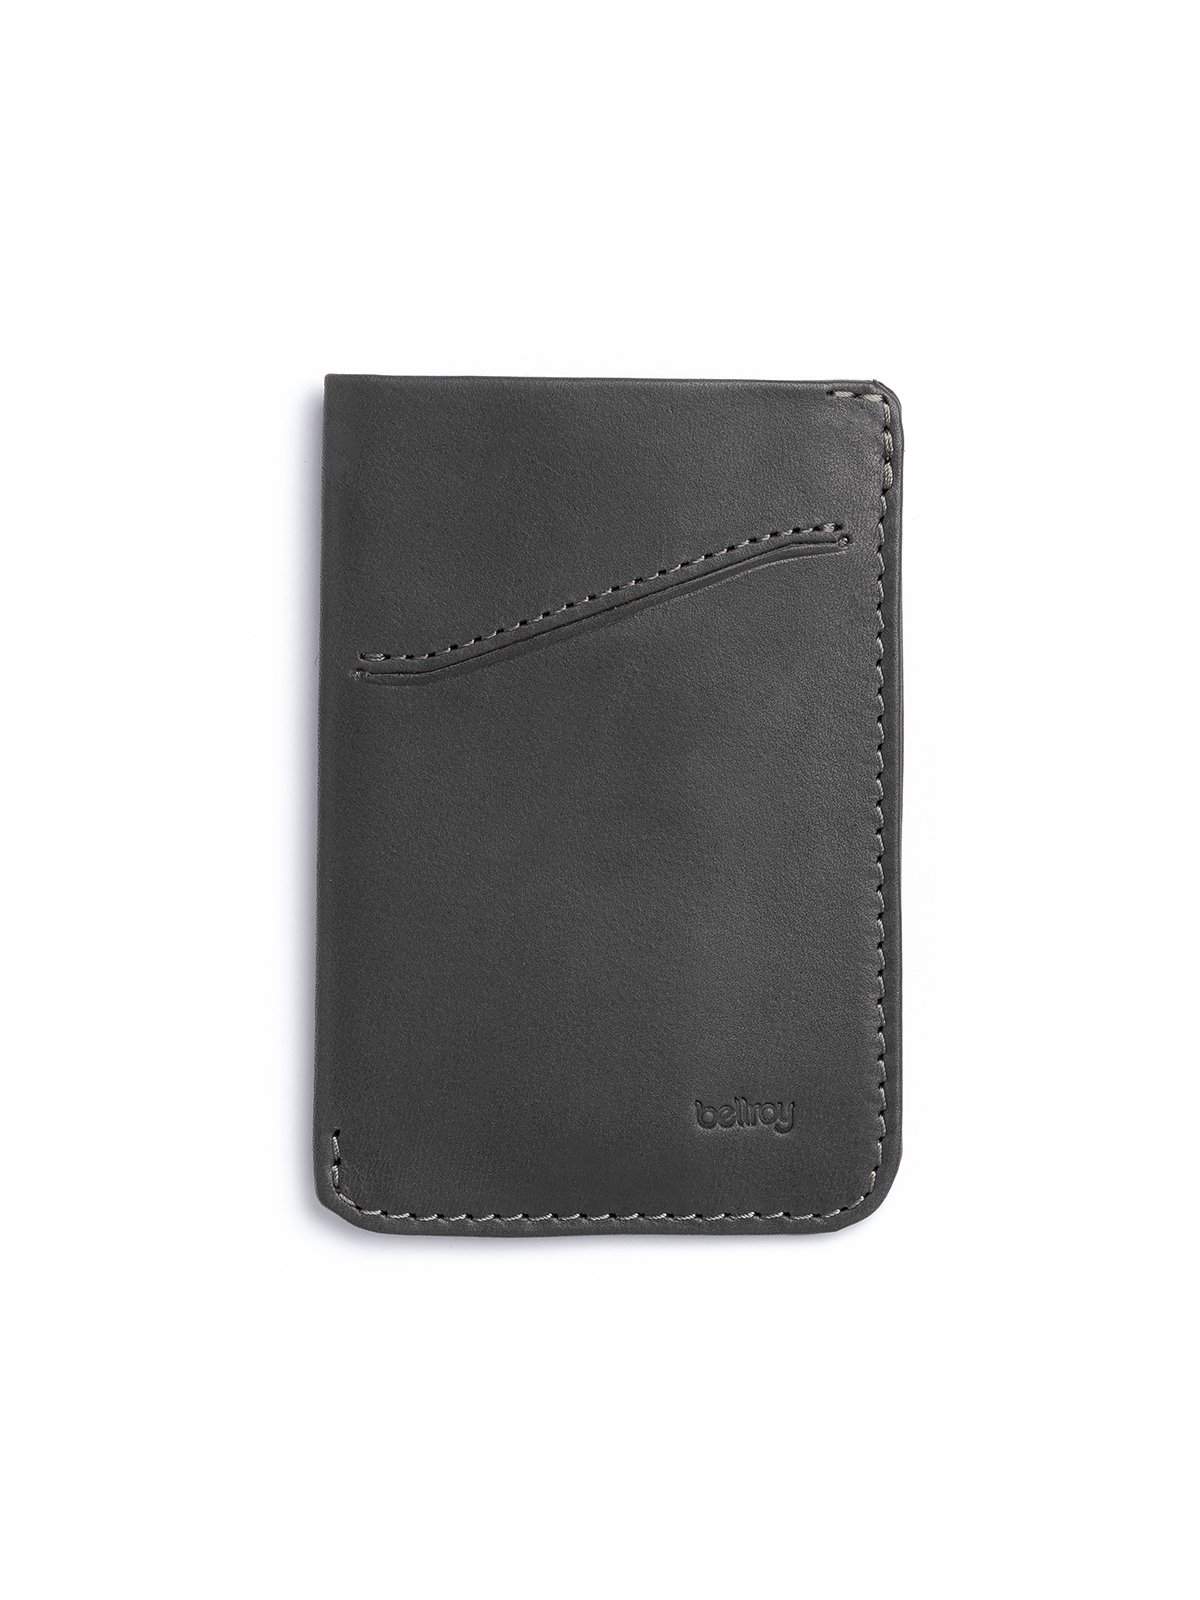 Bellroy Card Sleeve Charcoal - MORE by Morello Indonesia